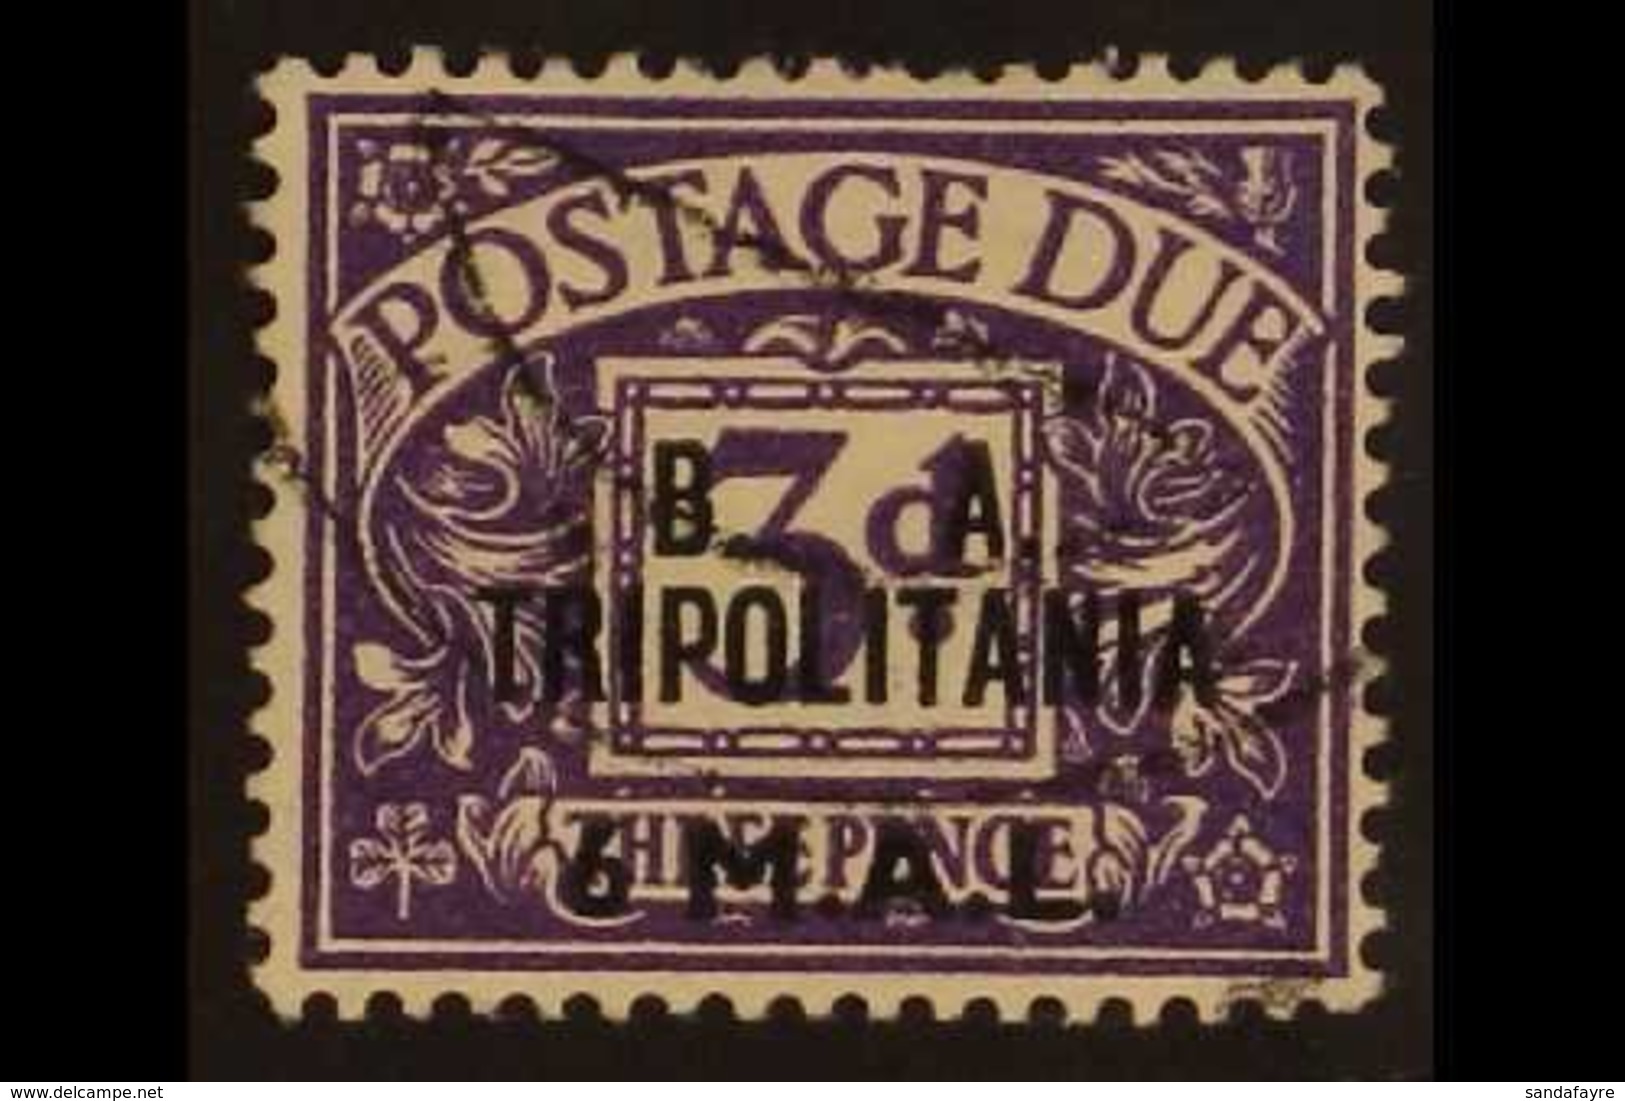 TRIPOLITANIA POSTAGE DUES - 1950 6L On 3d Violet Variety "wmk Sideways Inverted", SG TD9w, Very Fine Used. RPS Cert. For - Africa Orientale Italiana